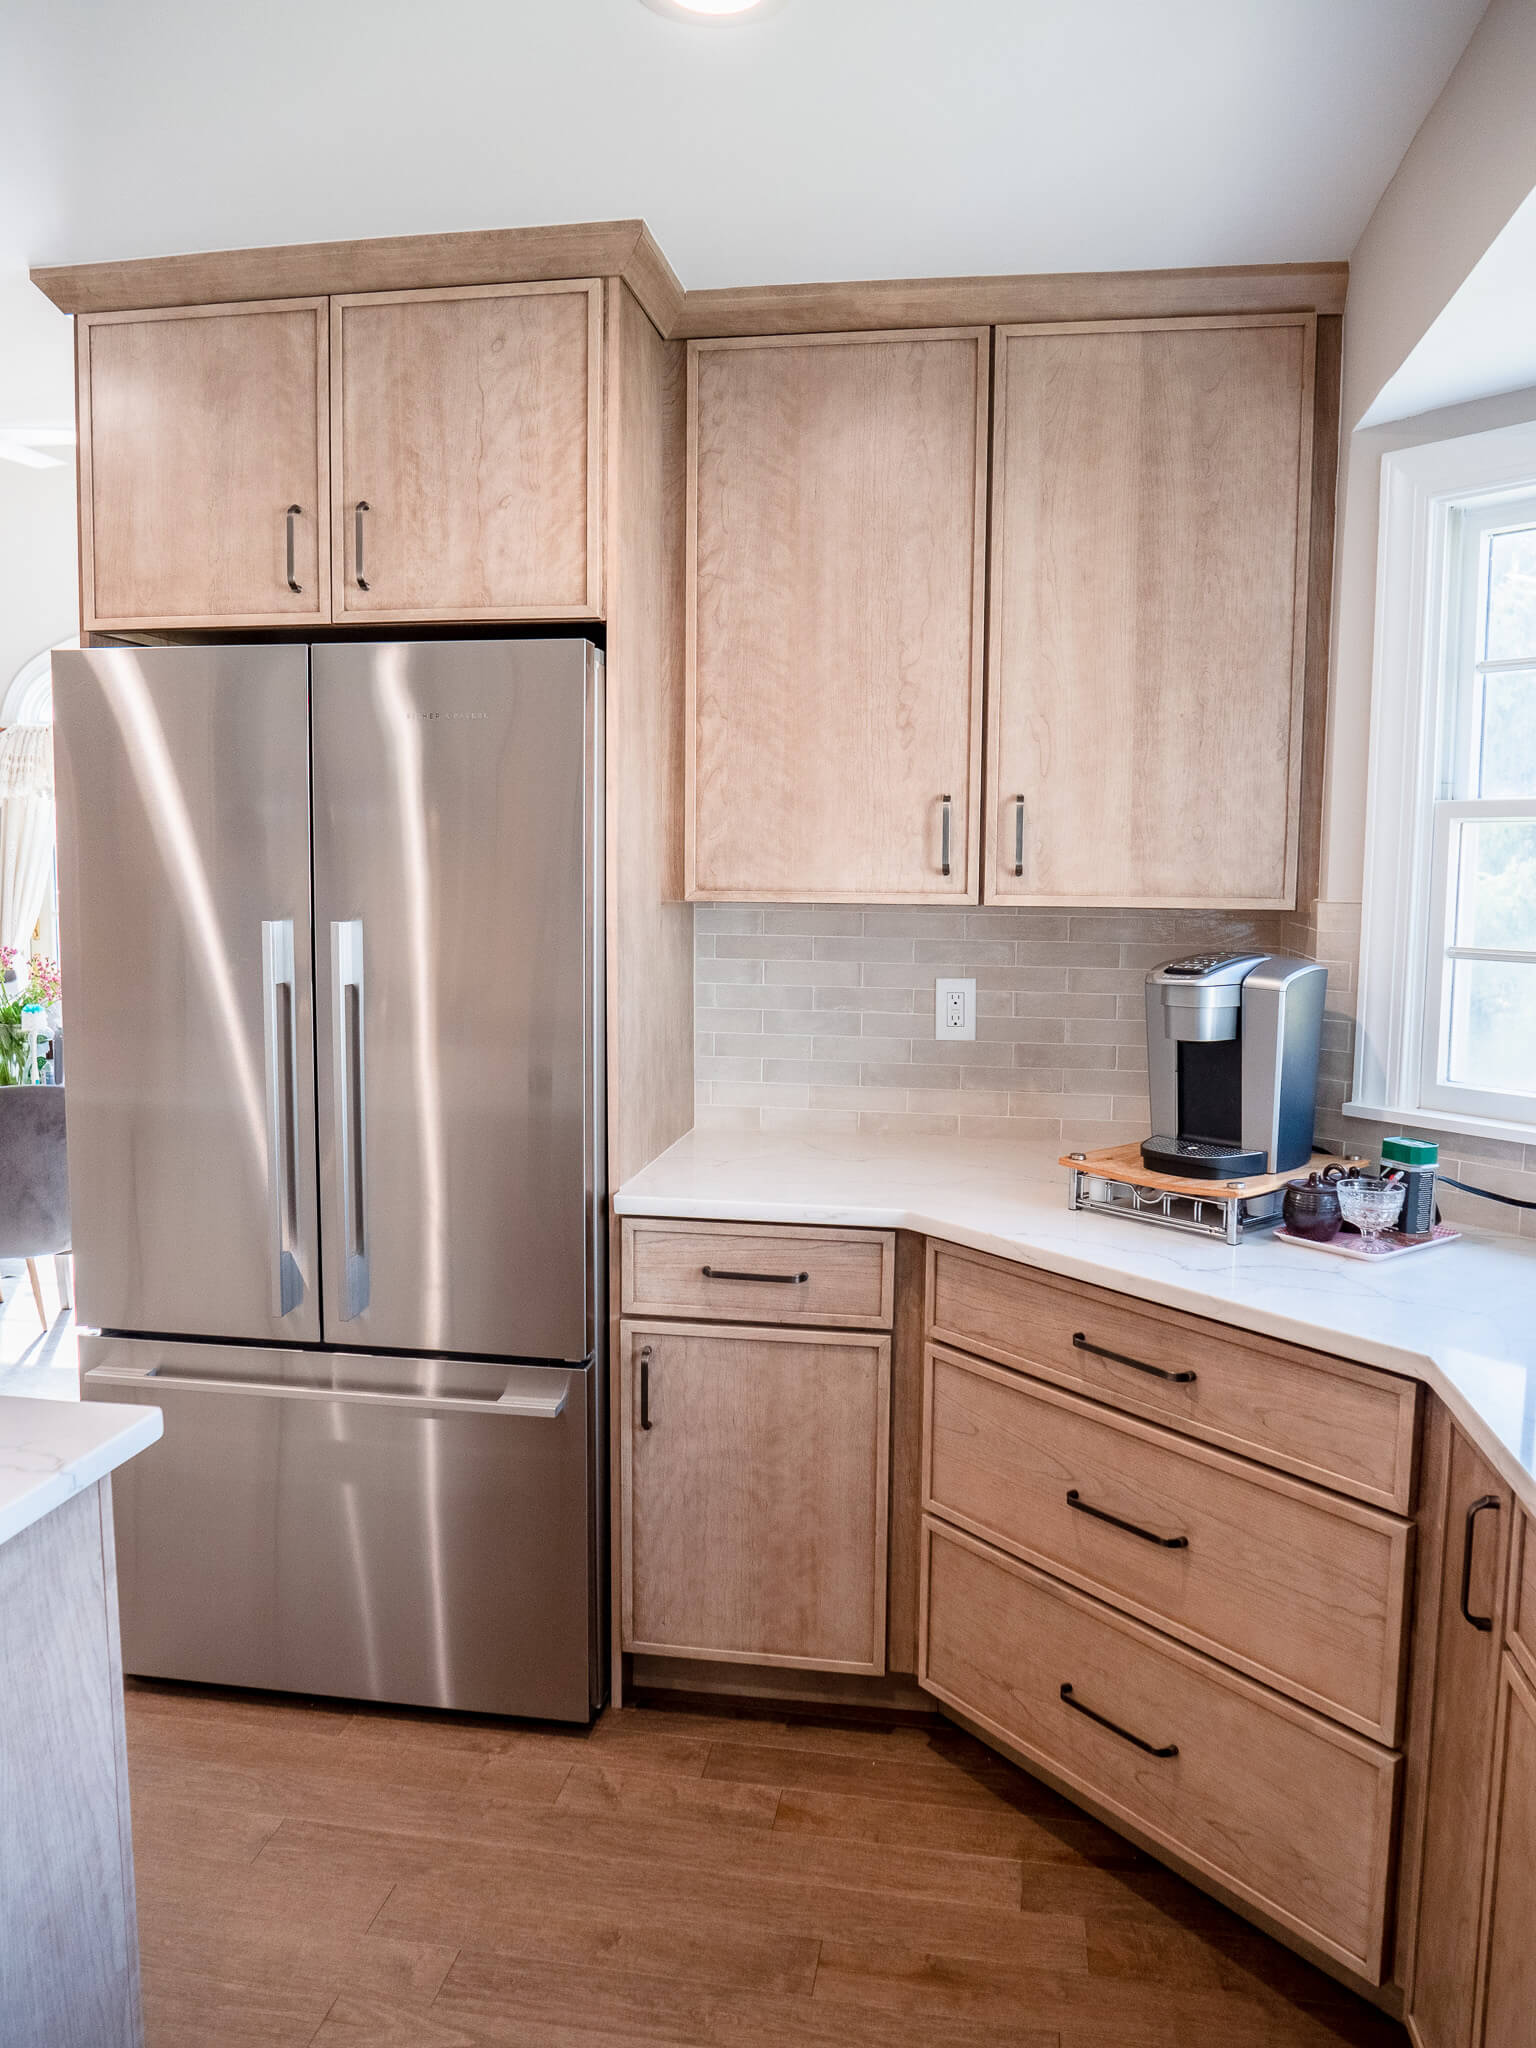 View of kitchen cabinets and refrigerator